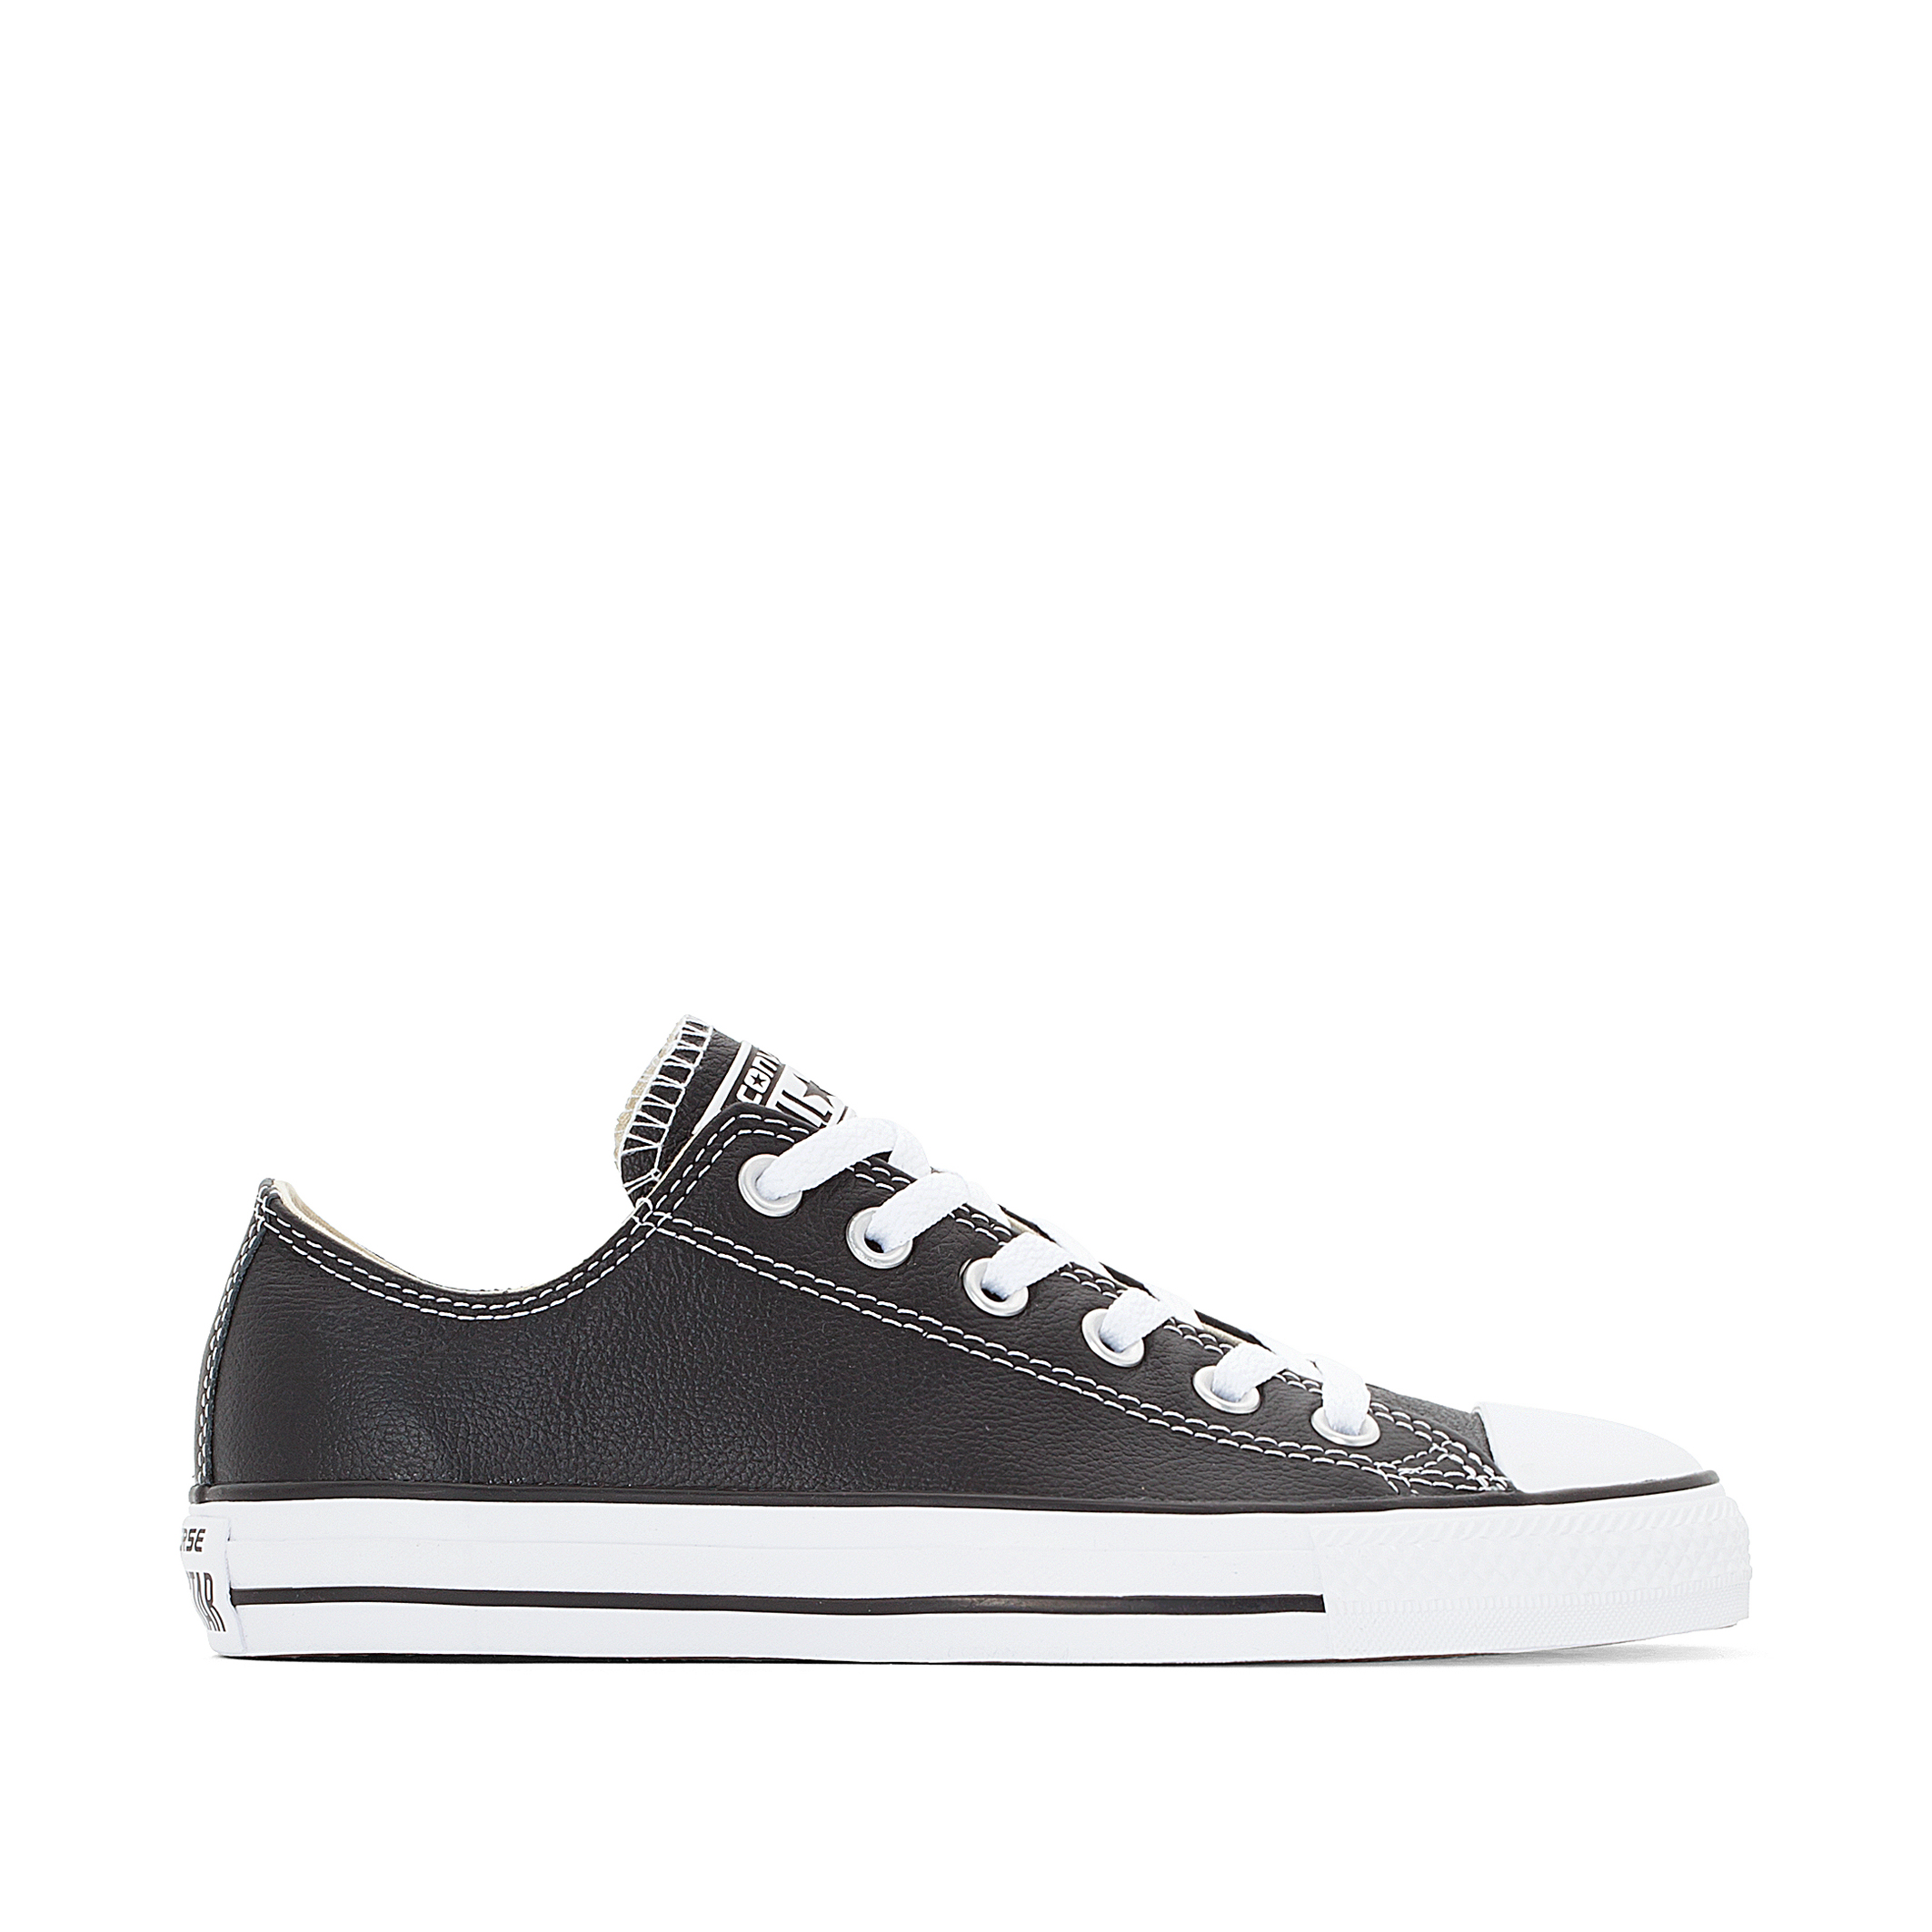 converse all star leather low top